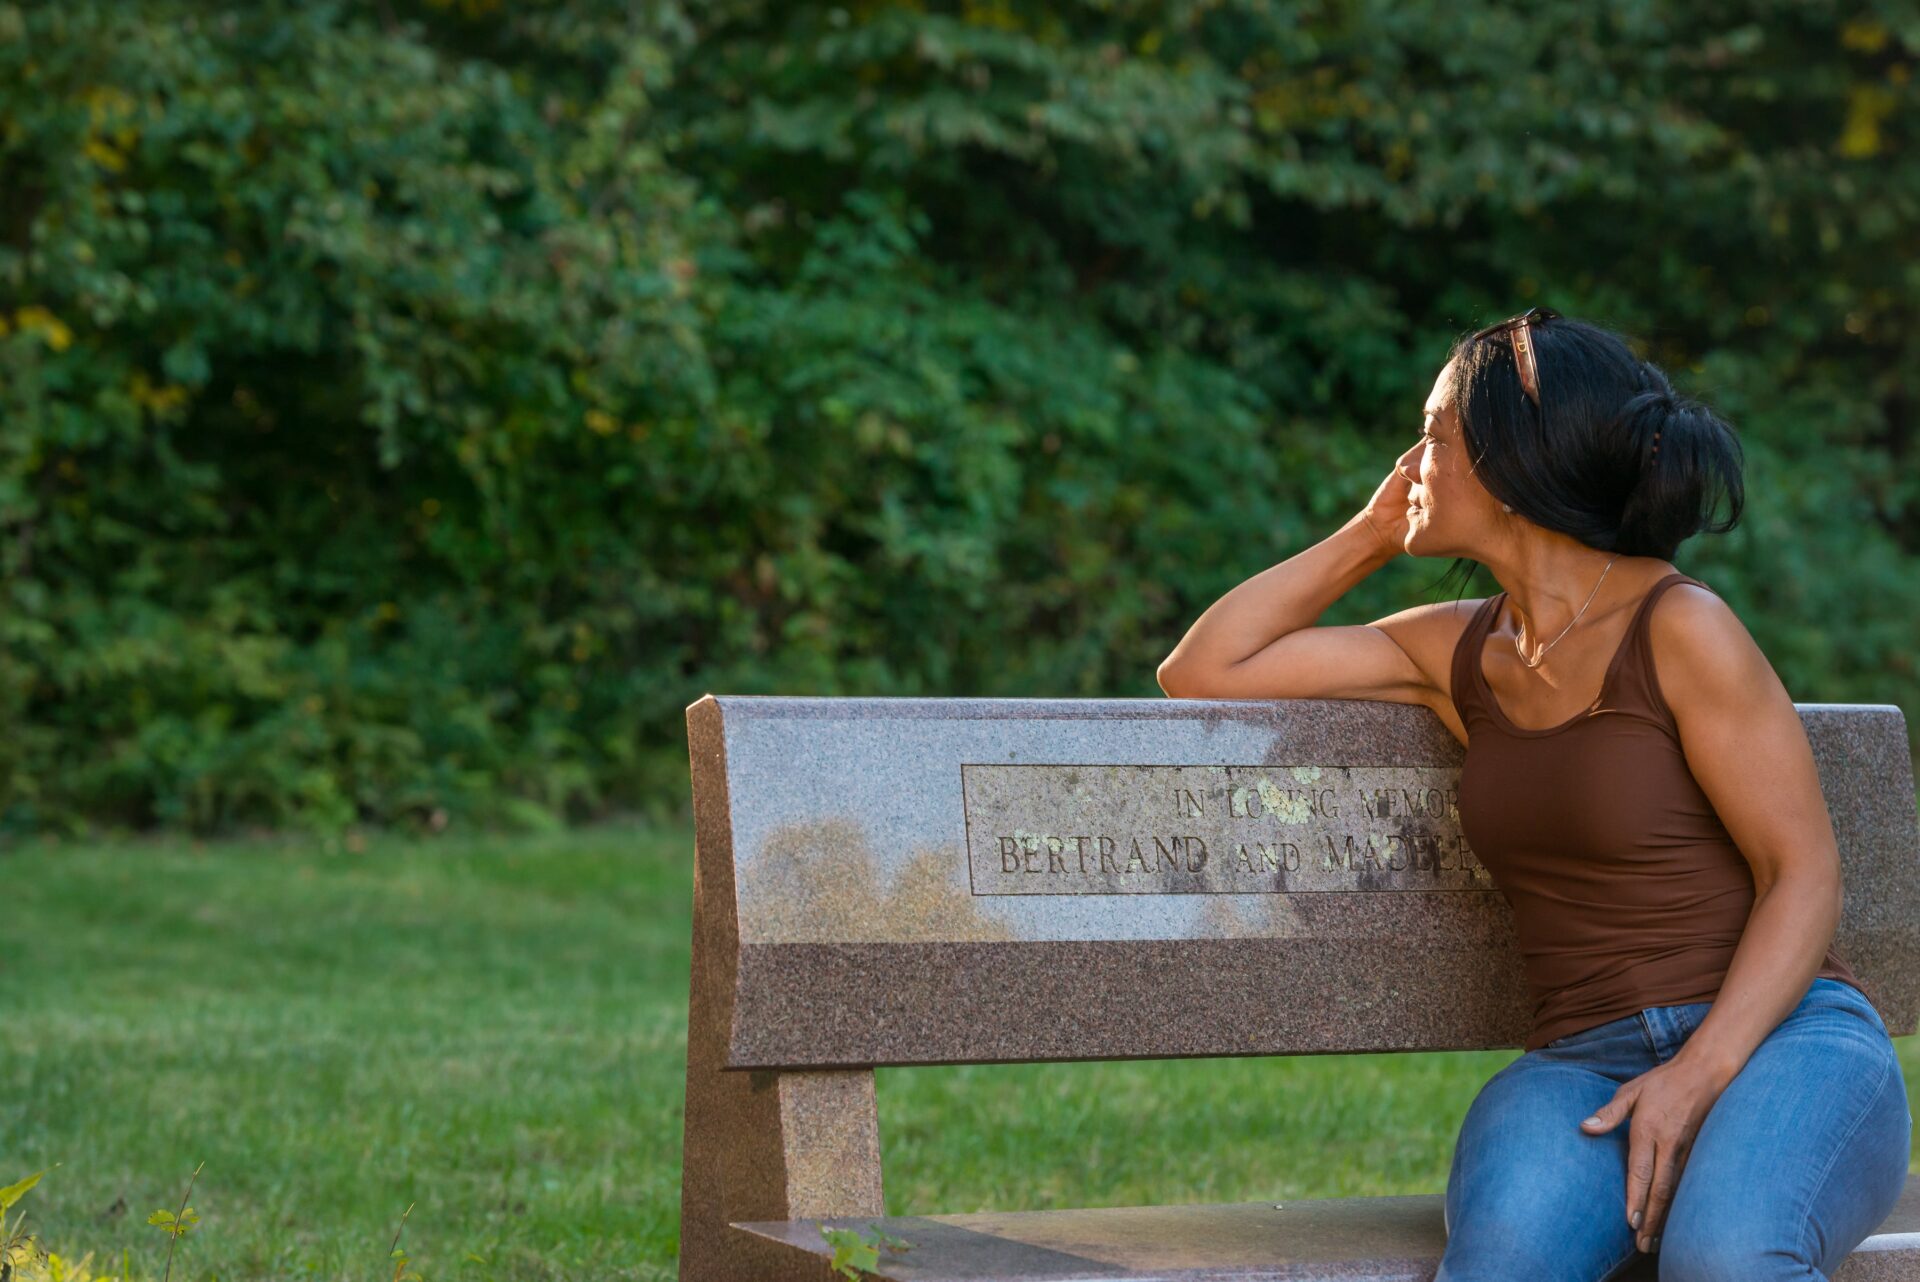 A young woman enjoying the nature on a memorial bench at the Ridge Recovery Center in Windham, CT.